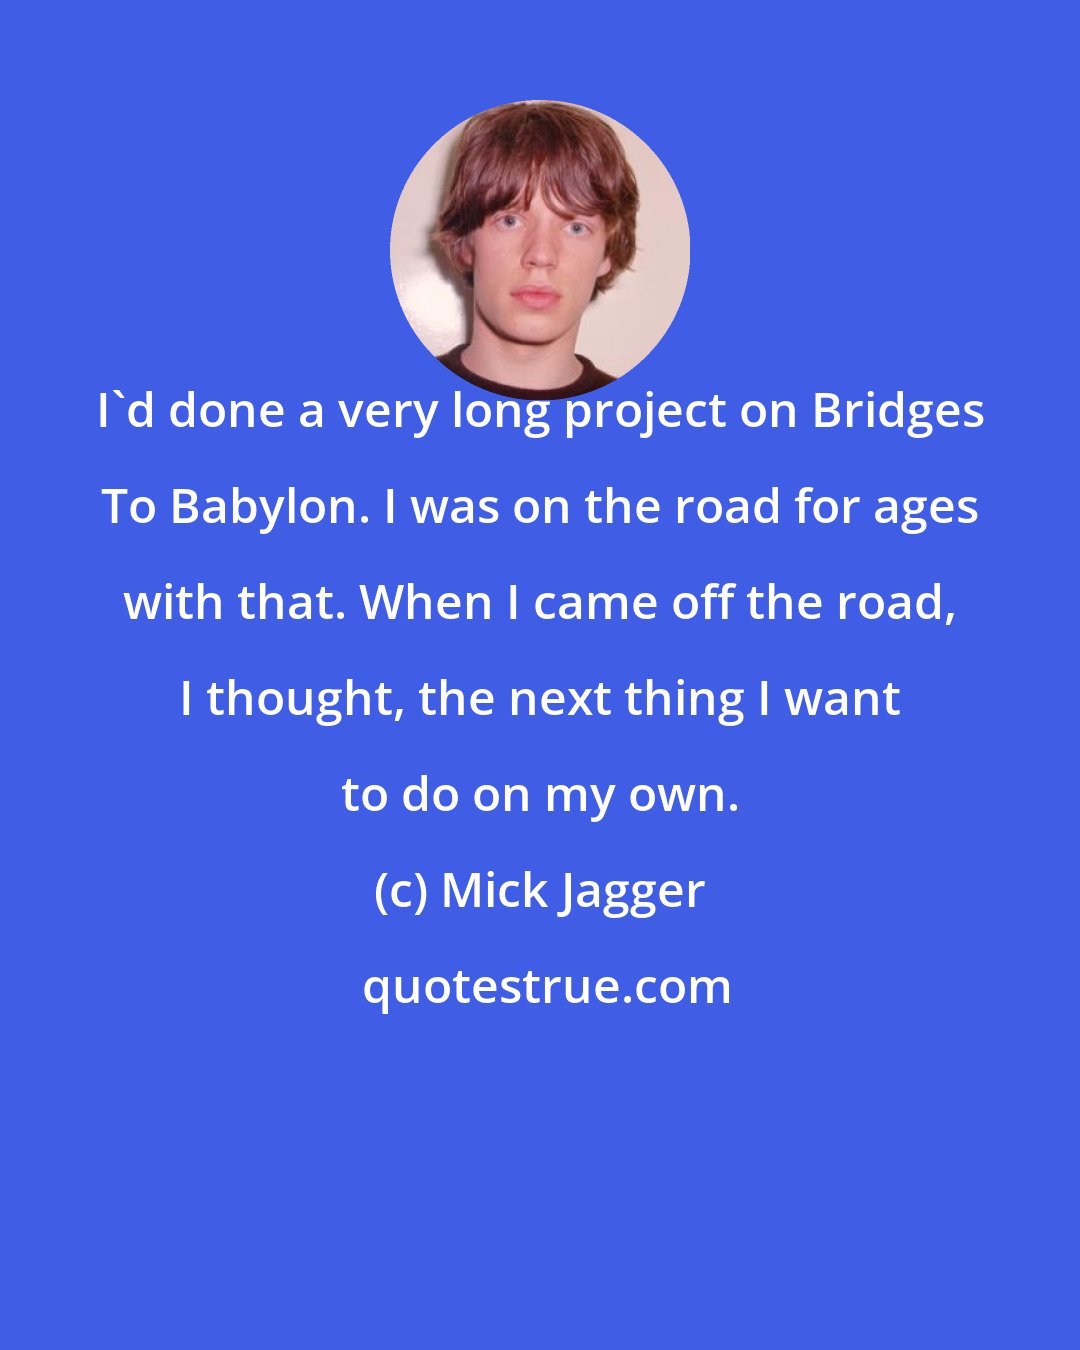 Mick Jagger: I'd done a very long project on Bridges To Babylon. I was on the road for ages with that. When I came off the road, I thought, the next thing I want to do on my own.